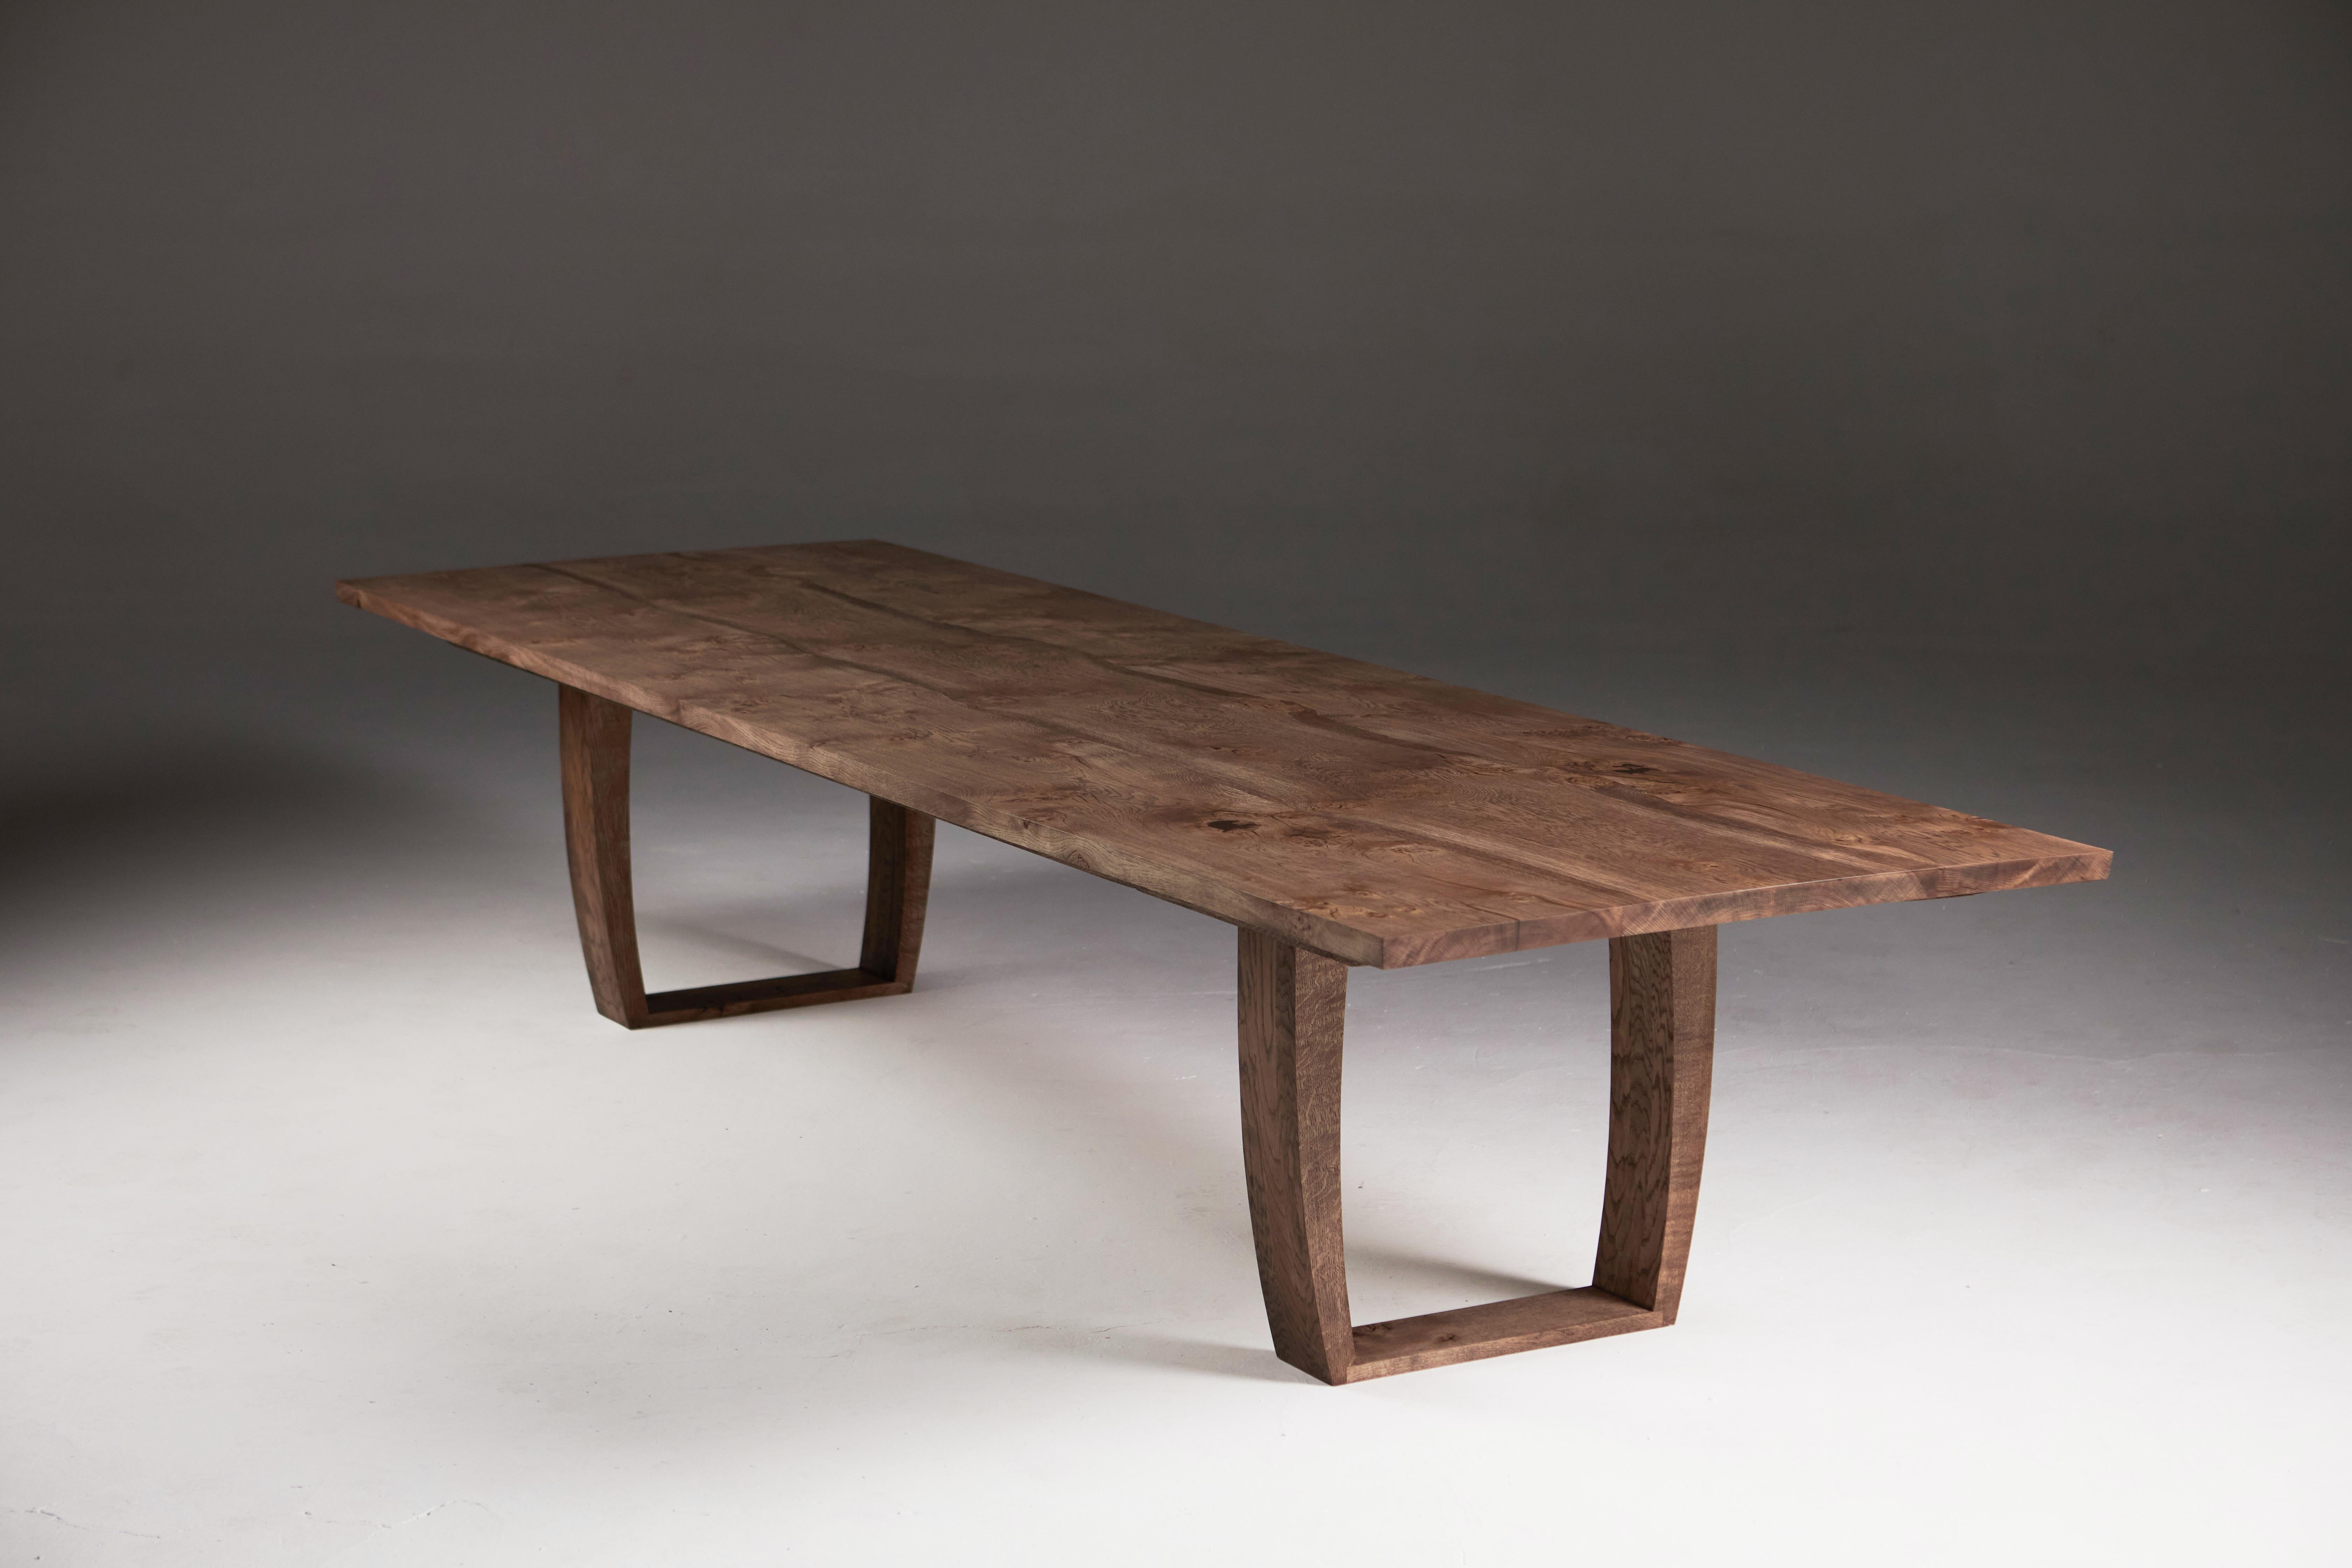 Made from two pieces of book-matched solid English oak that have been joined along the live edge with a
central infill of more oak. 
The table has a 60 cm extension at one end, but the table can be made with extensions at both ends to increase the